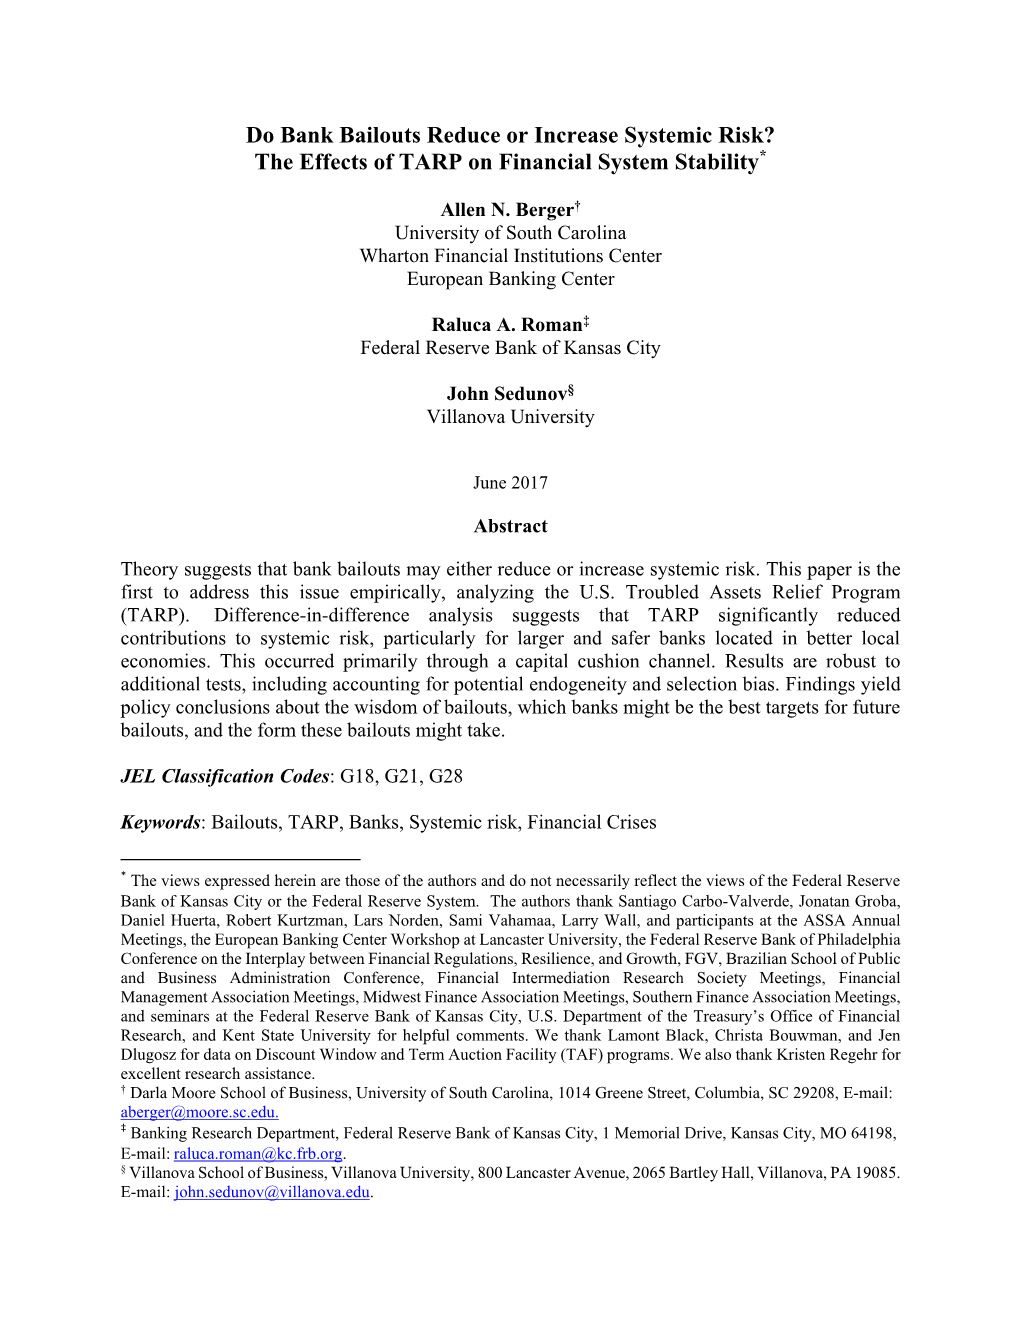 Do Bank Bailouts Reduce Or Increase Systemic Risk? the Effects of TARP on Financial System Stability*